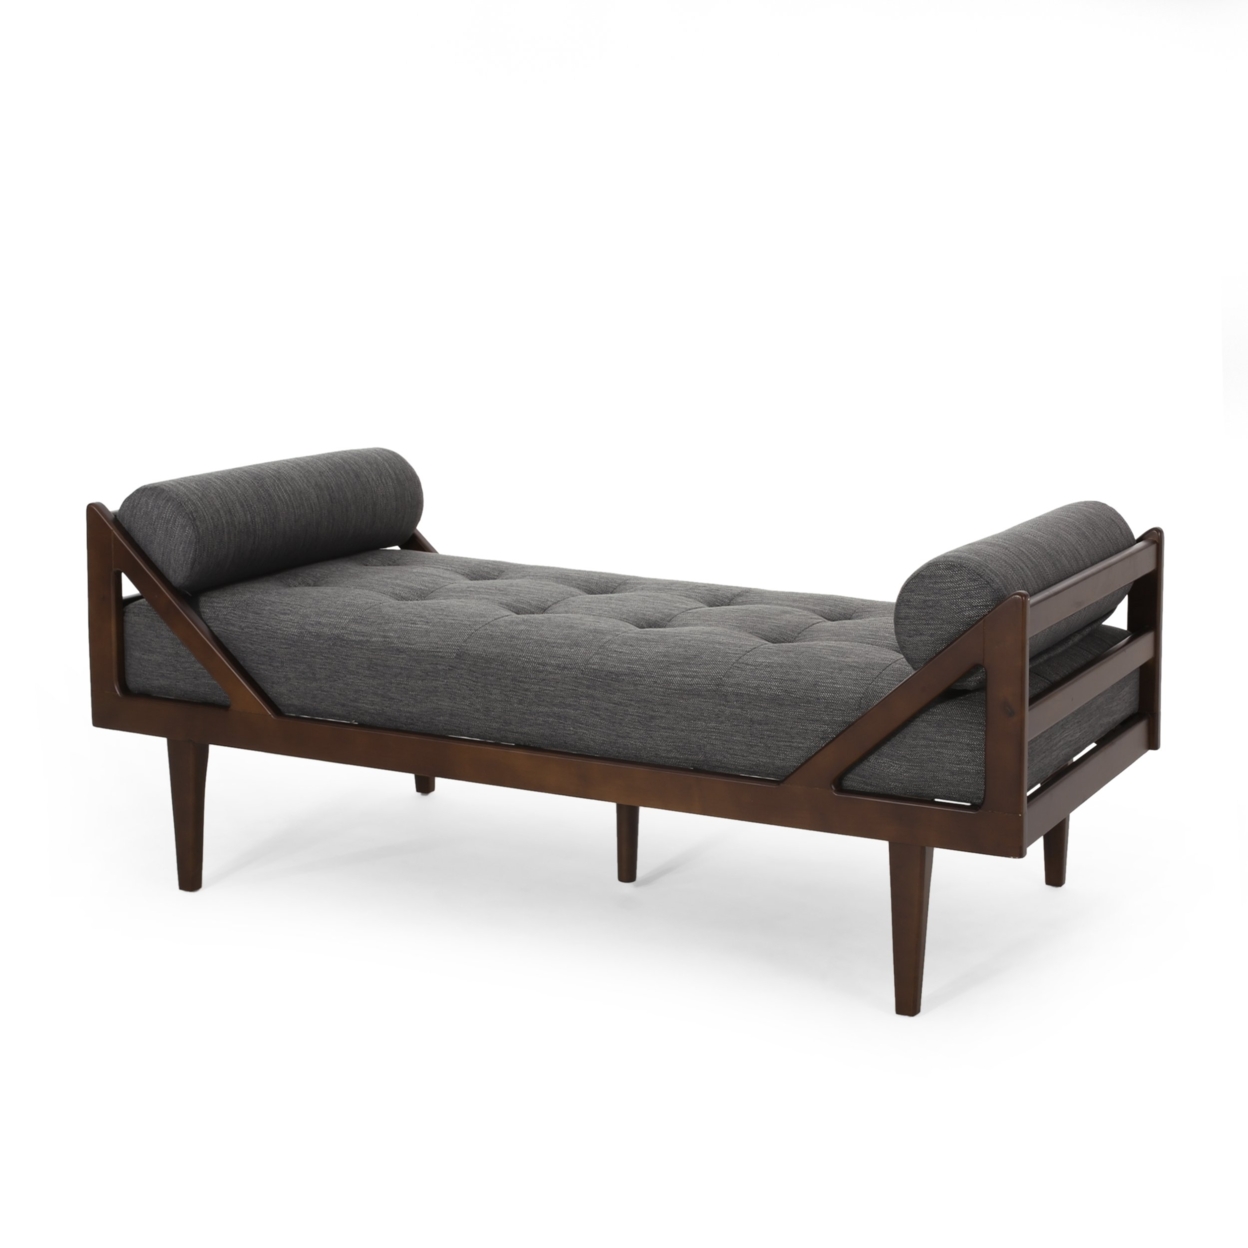 Sumner Contemporary Tufted Chaise Lounge With Rolled Accent Pillows - Dark Brown/charcoal